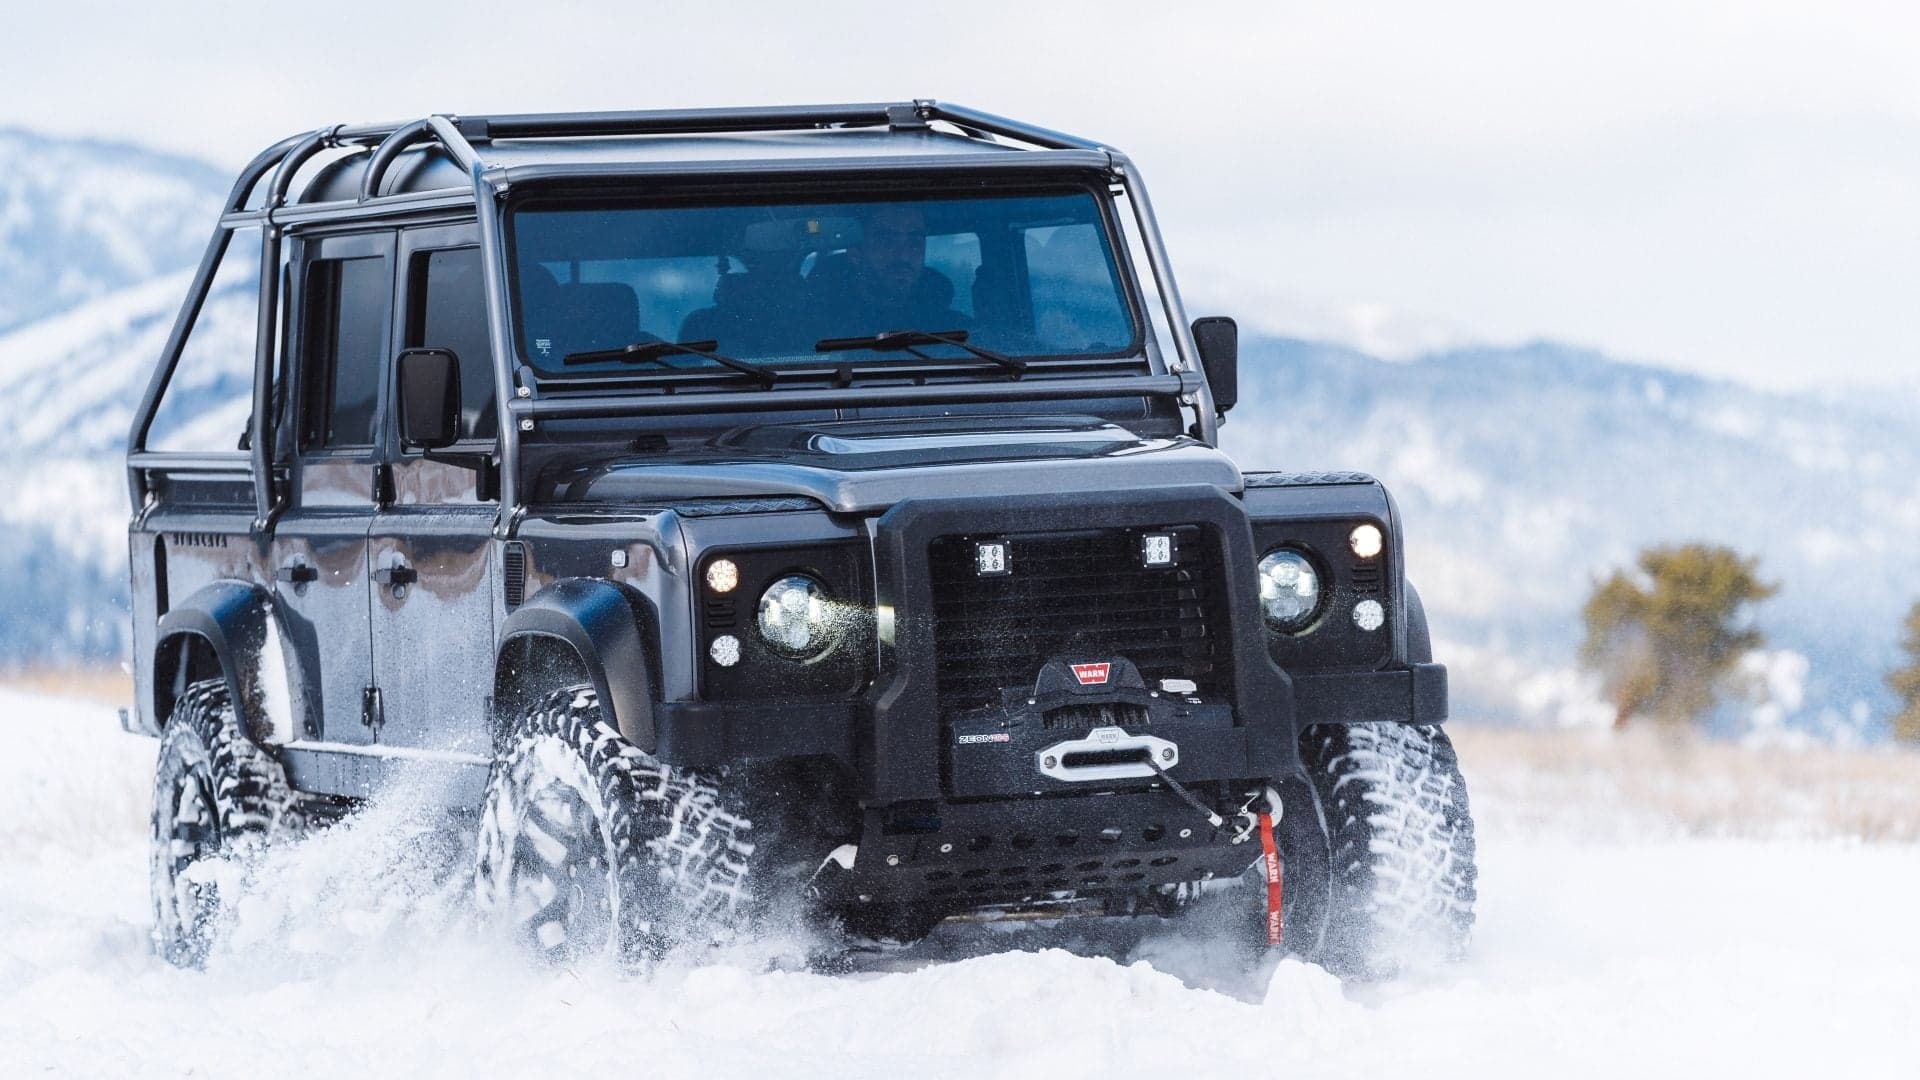 $250,000 Will Buy You This Land Rover Defender Restomod With LS3 Power